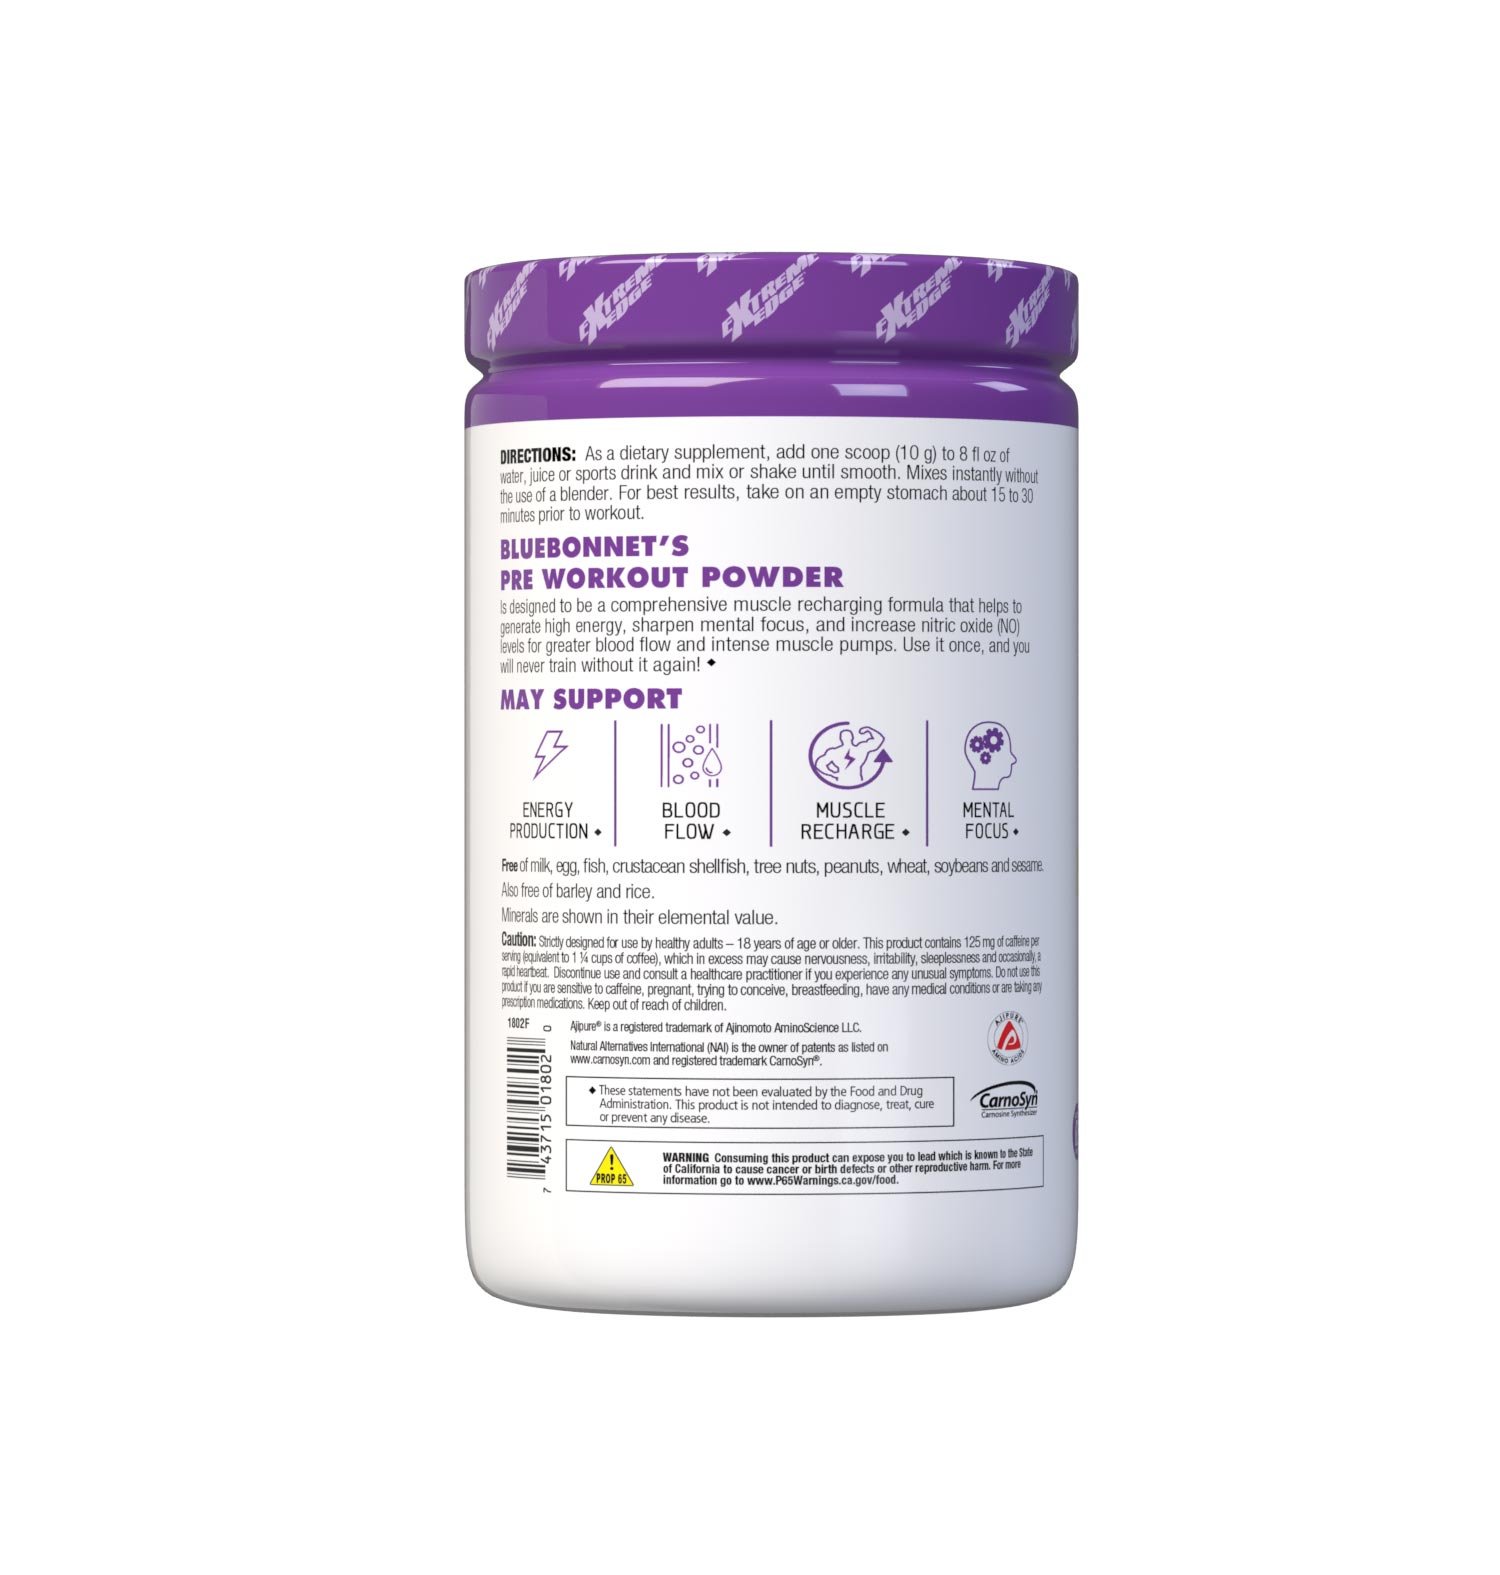 Bluebonnet's Lemon Flavored Pre Workout powder is designed to be one of the most comprehensive, muscle recharging formulas ever created. This triple-turbo, super-charged formula generates high energy, sharpens mental concentration, and increases nitric oxide (NO) levels for greater blood flow and intense muscle pumps. Description panel. #size_1.32 lb